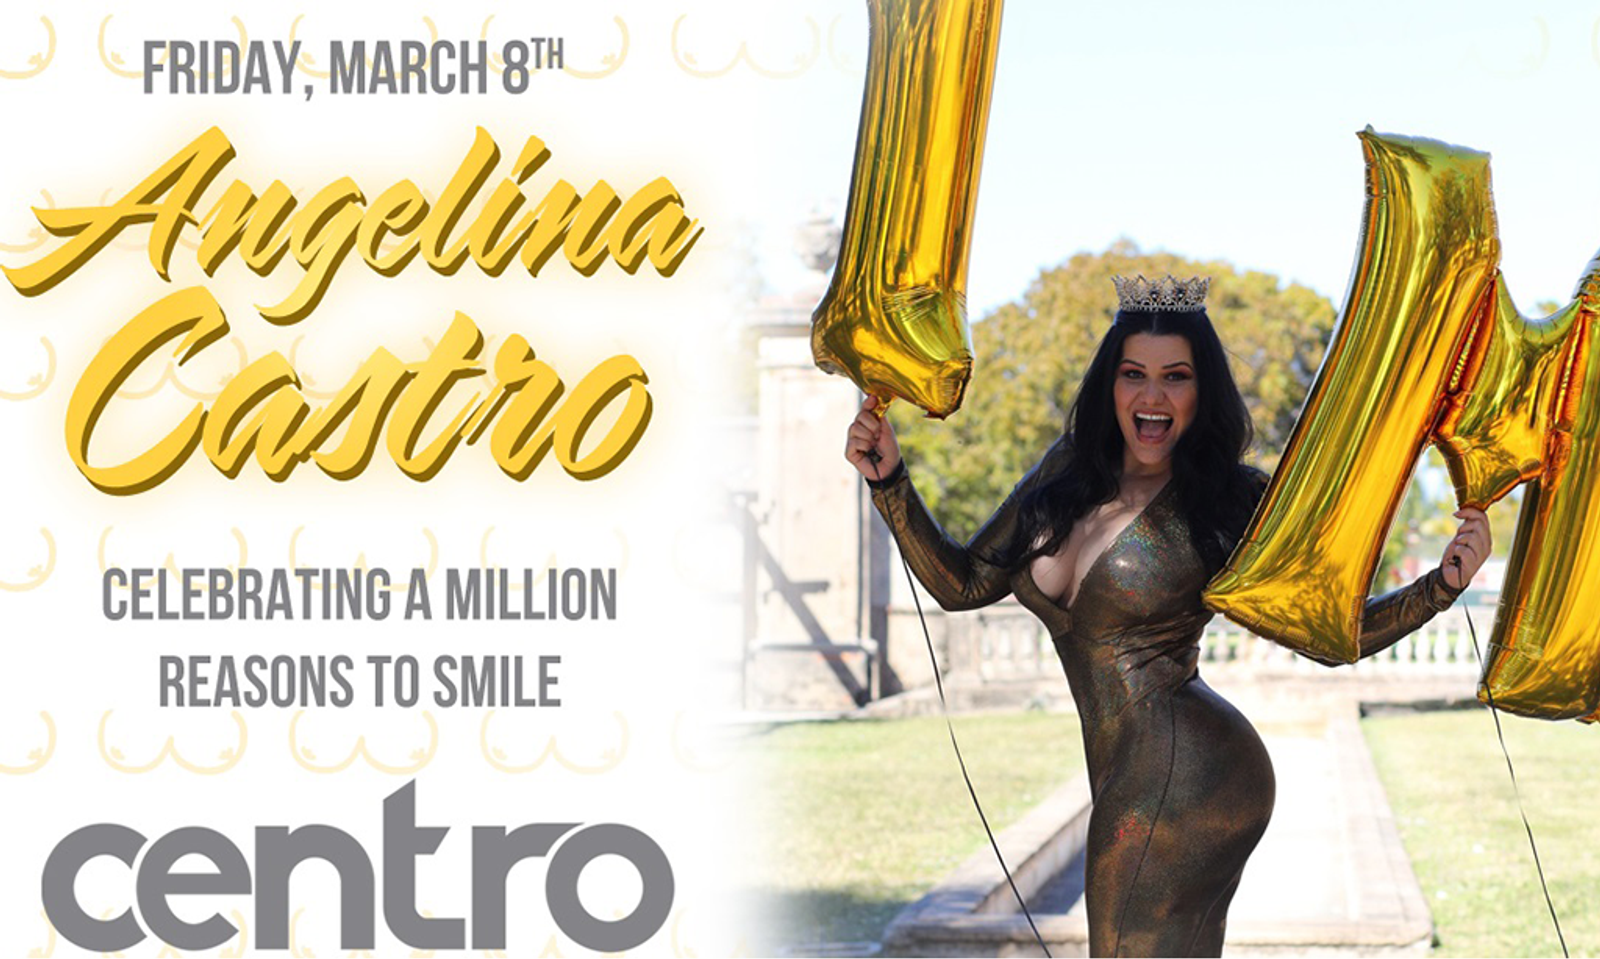 Angelina Castro Celebrating 1M IG Followers with Party in Miami